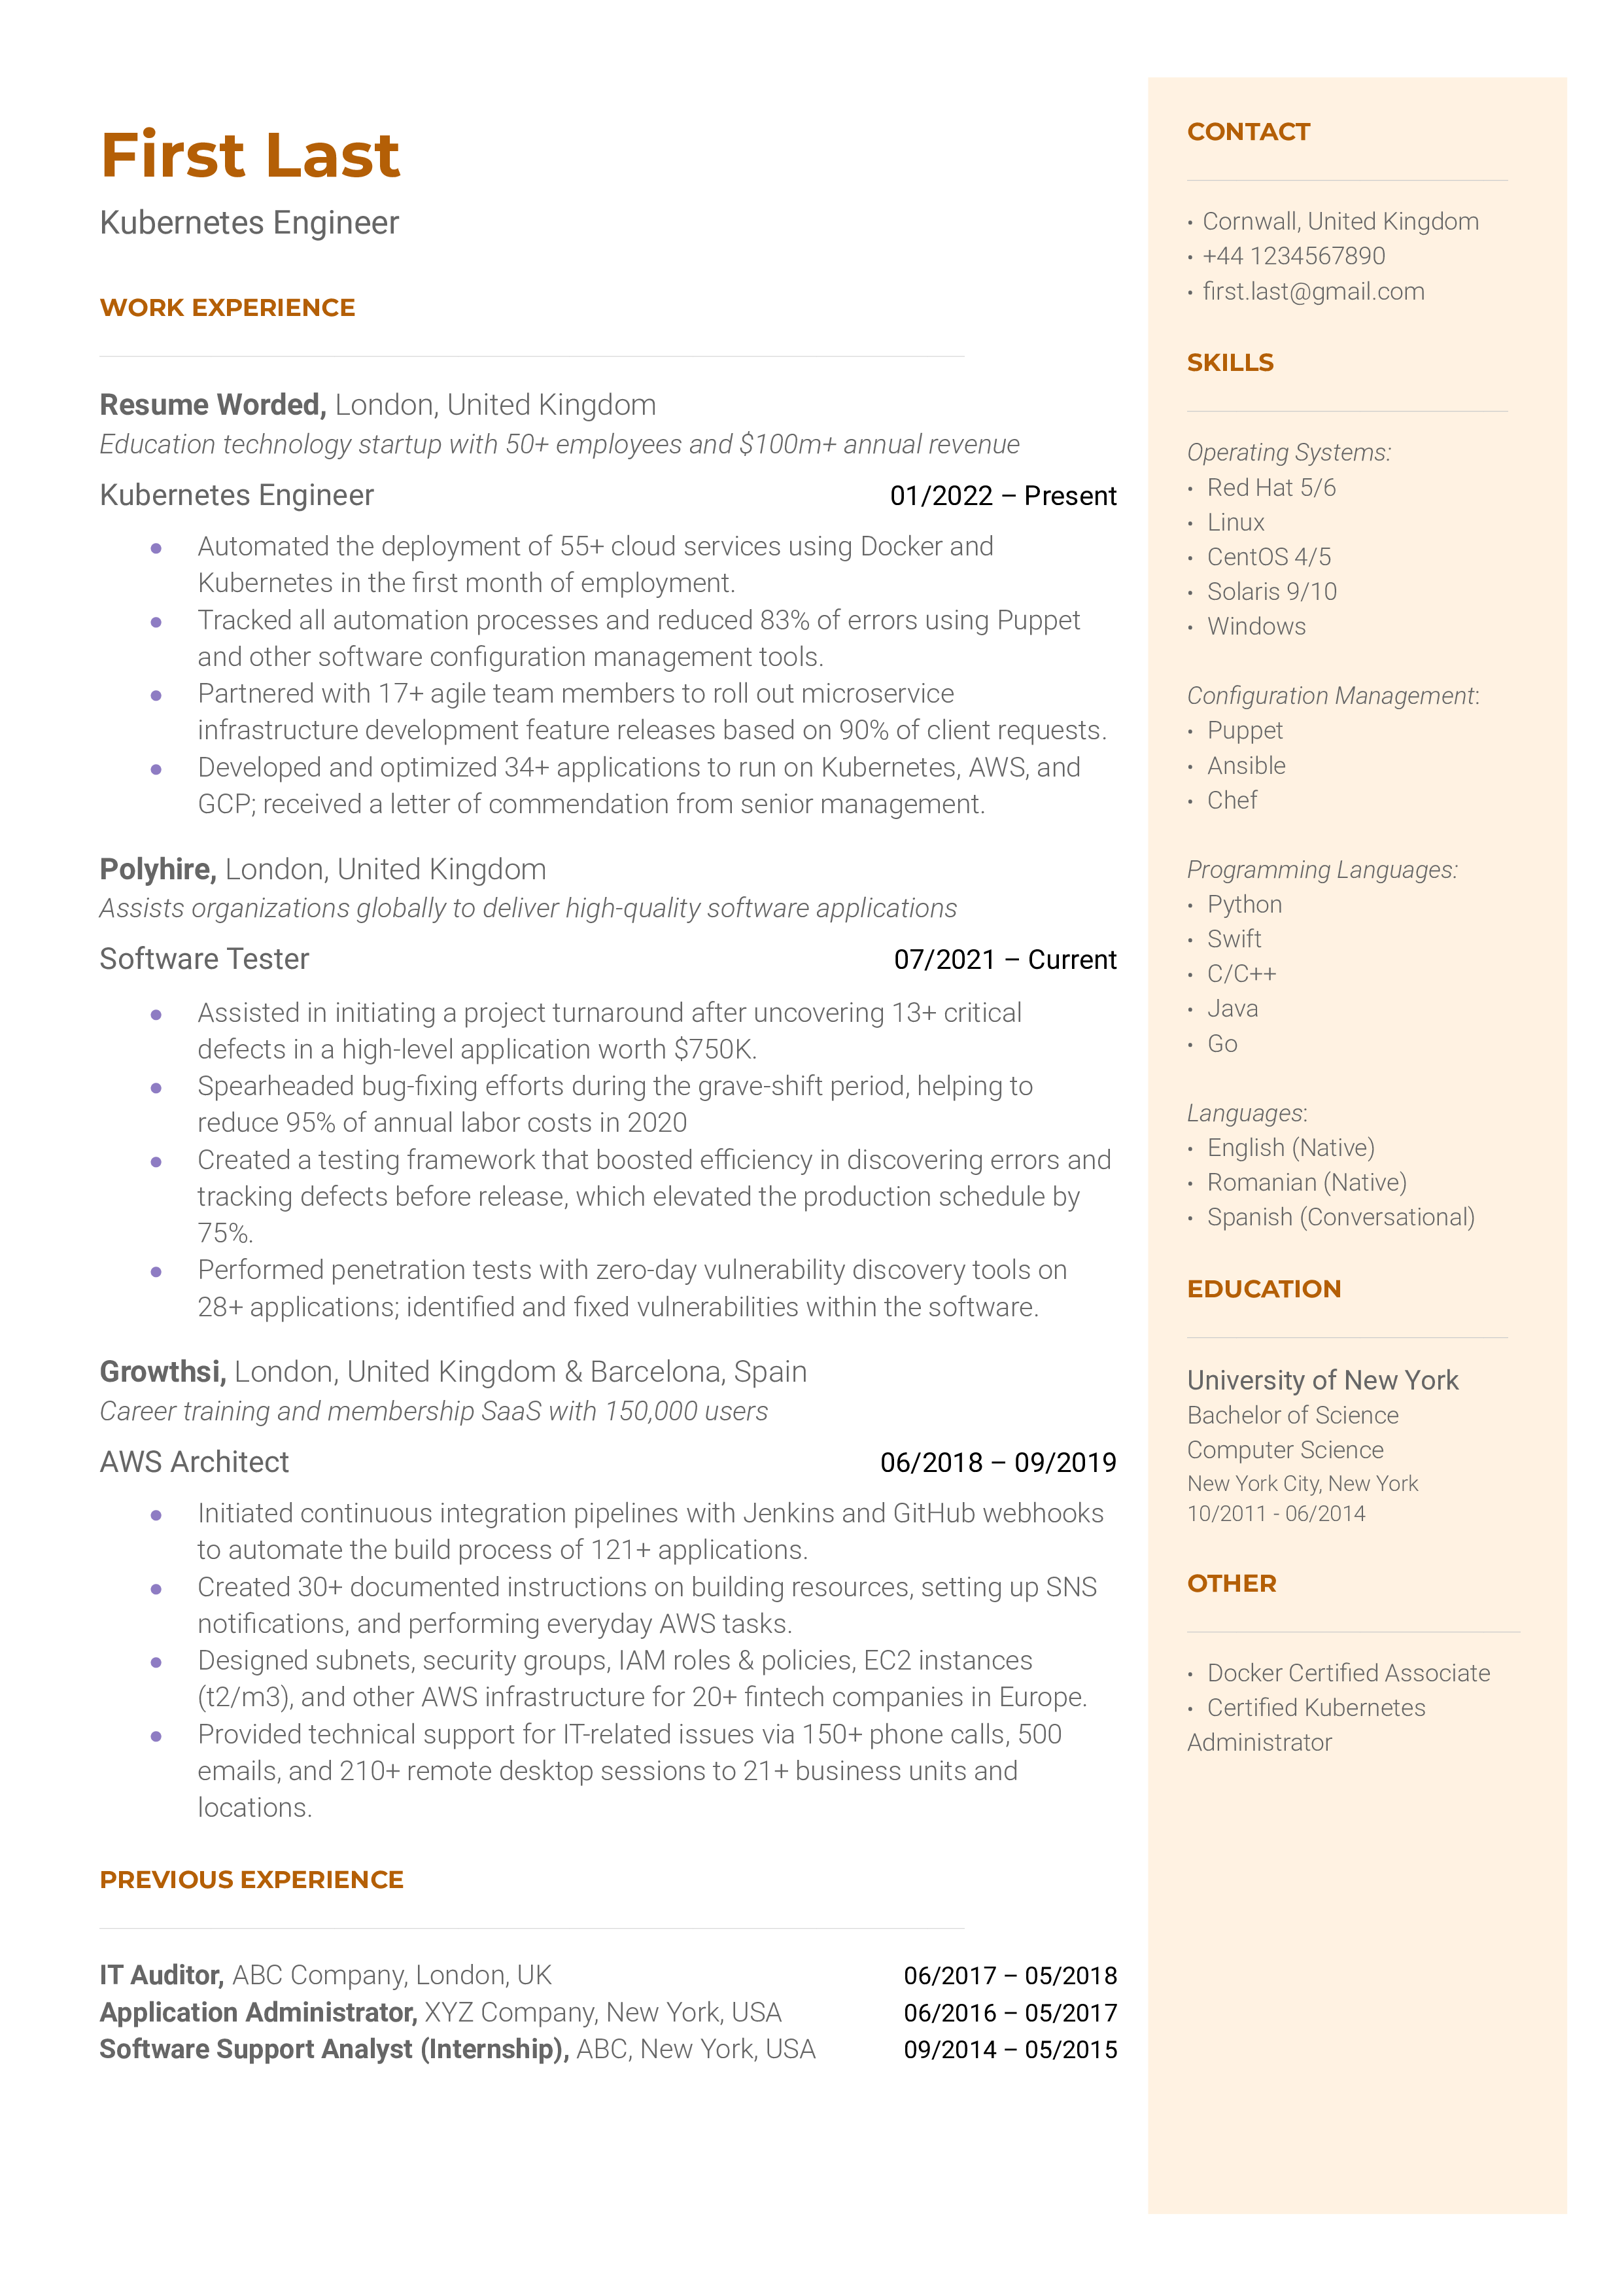 A resume for a Kubernetes engineer with a degree in computer science and experience as a AWS architect and software tester.